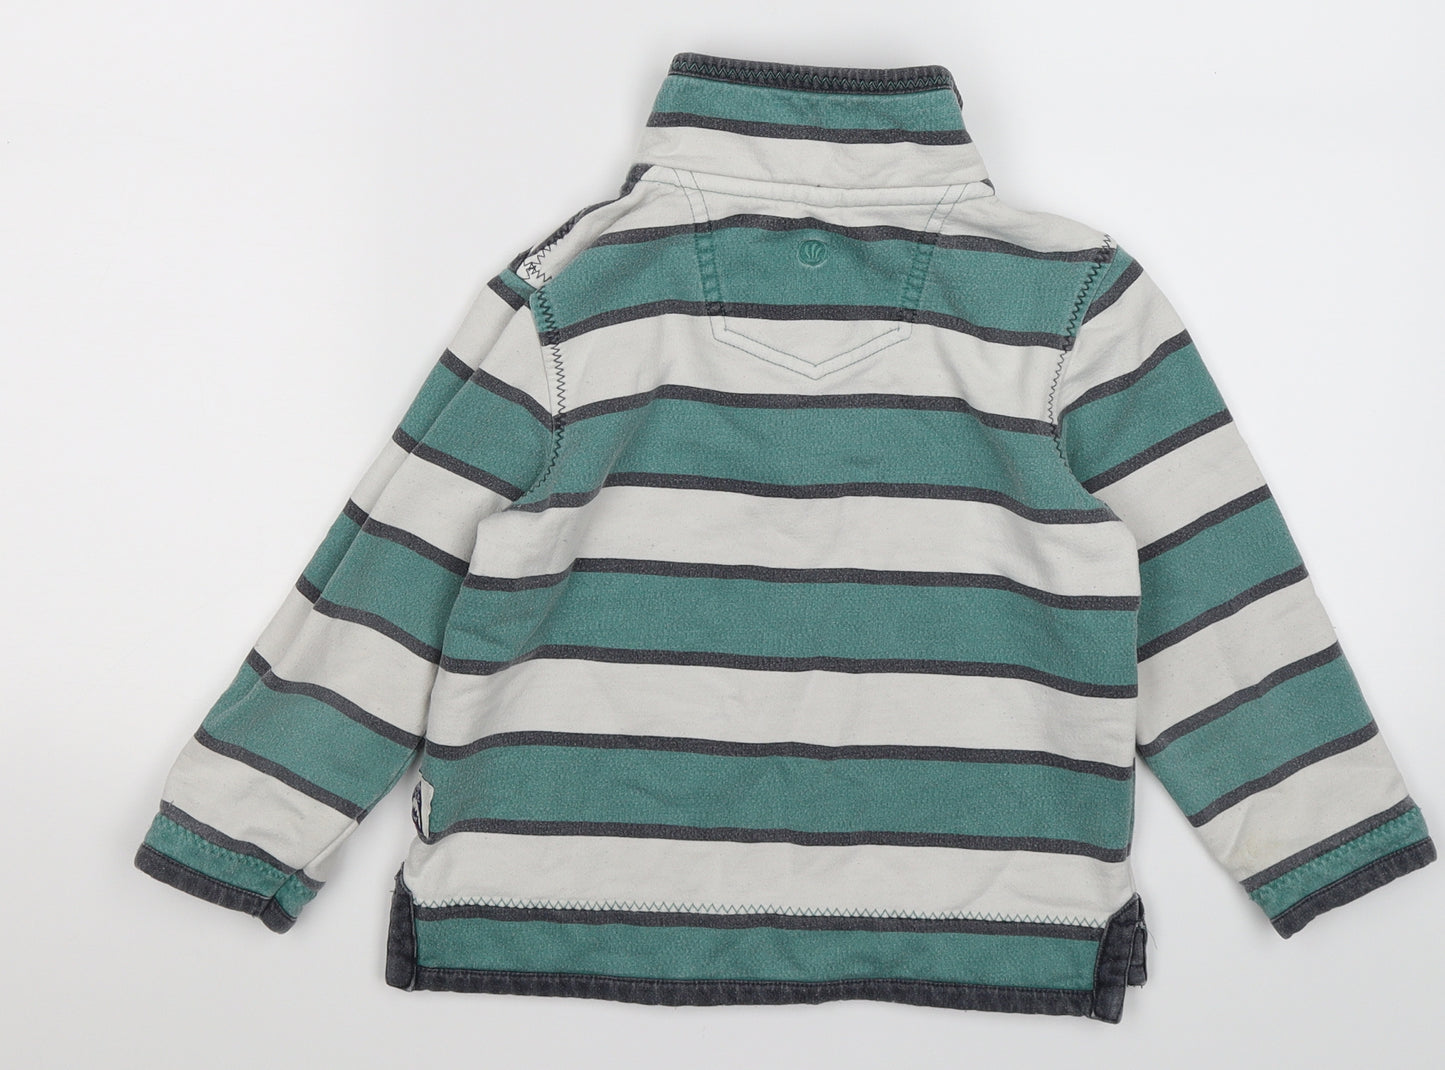 Fat Face Boys Green Striped Jersey Pullover Jumper Size 4-5 Years